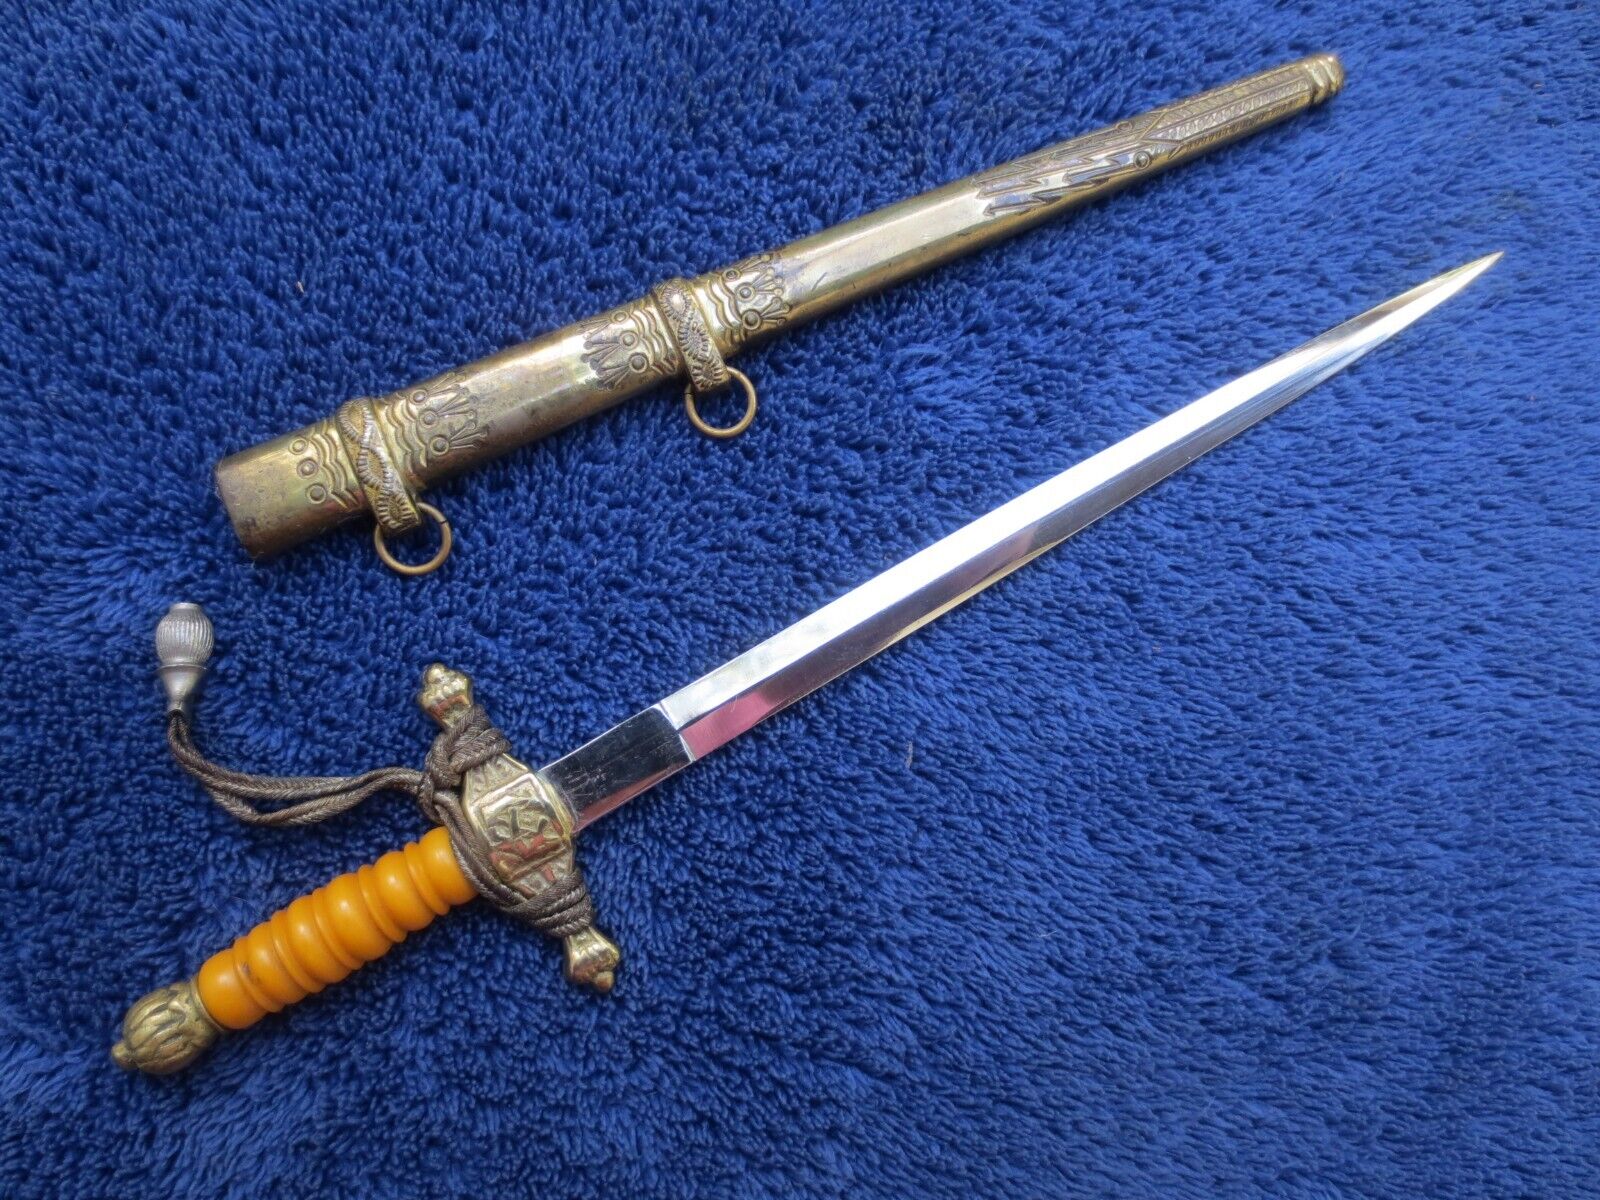  RARE ORIGINAL VINTAGE IMPERIAL NAVY MINIATURE DAGGER AND SCABBARD